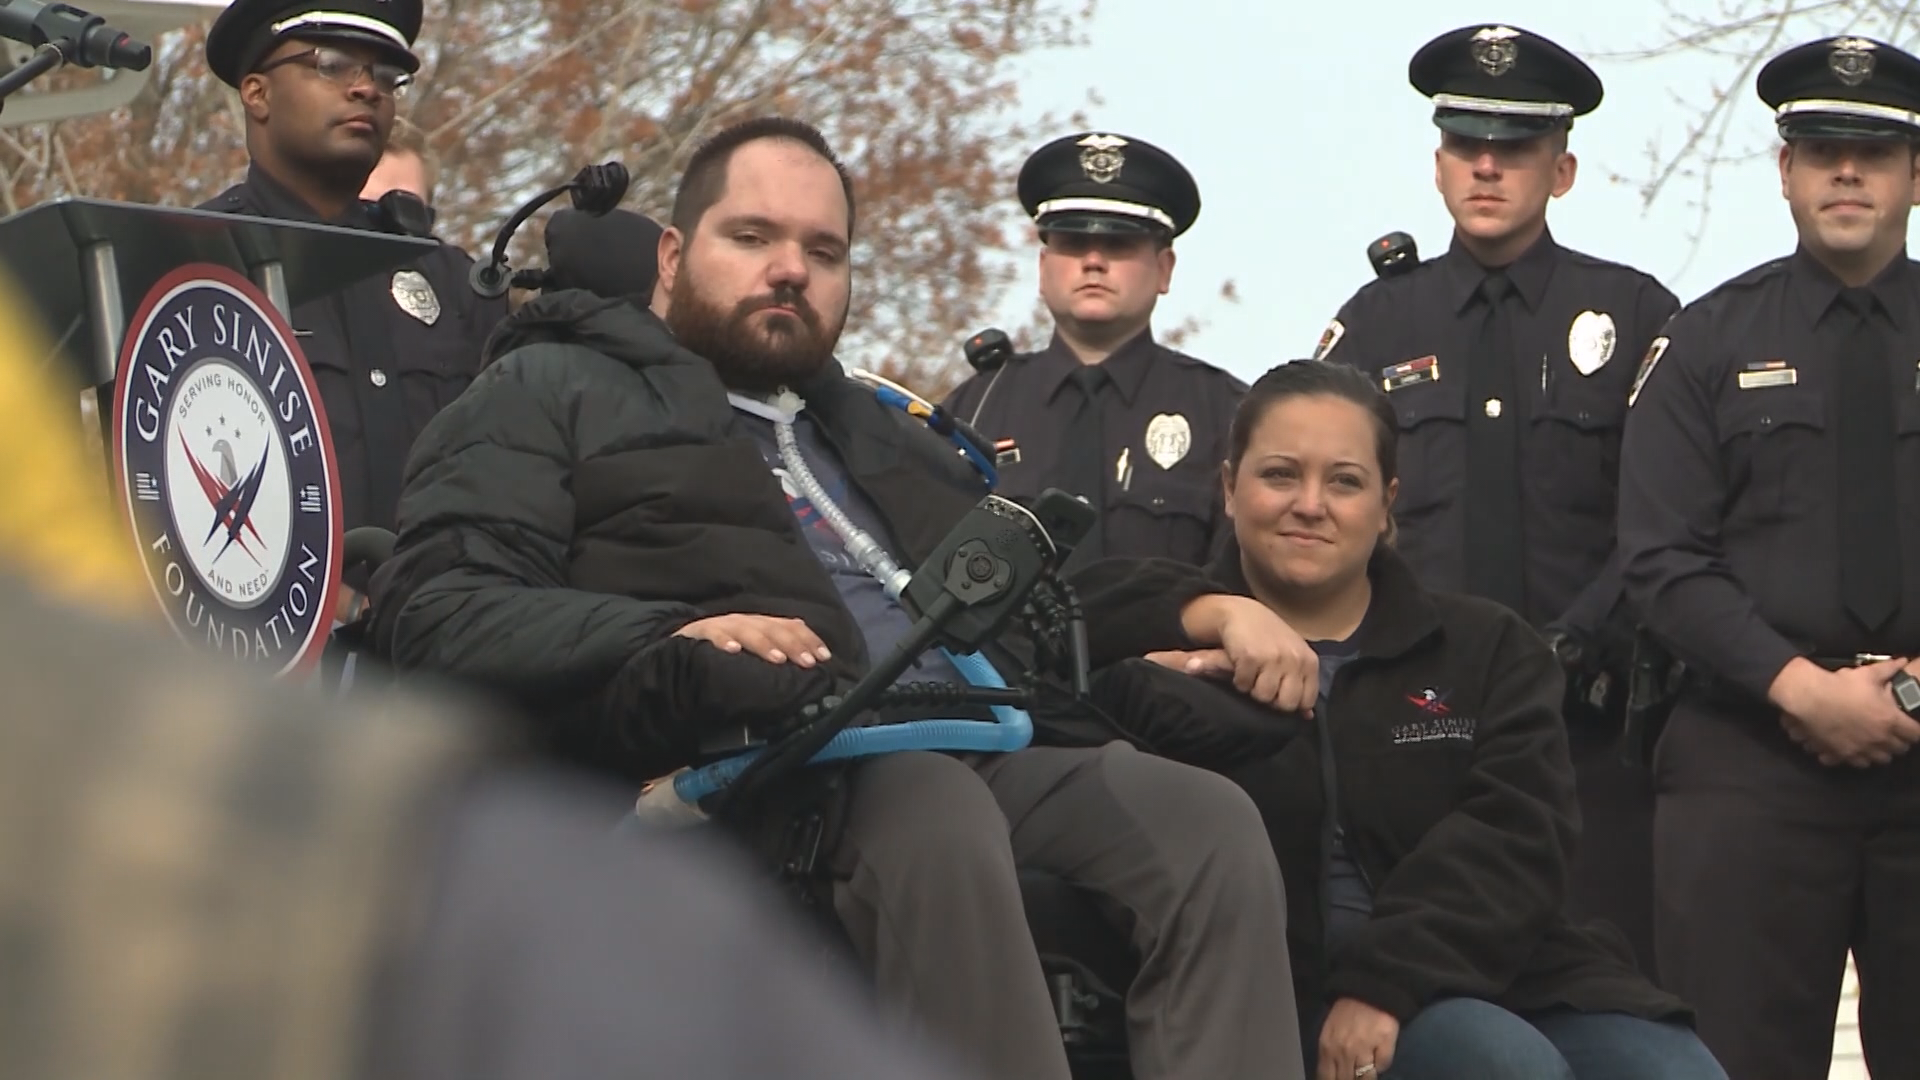 Lisa Flamion says her brother, paralyzed former Ballwin Officer Mike Flamion, is her inspiration to help prevent use-of-force situations with the mentally ill